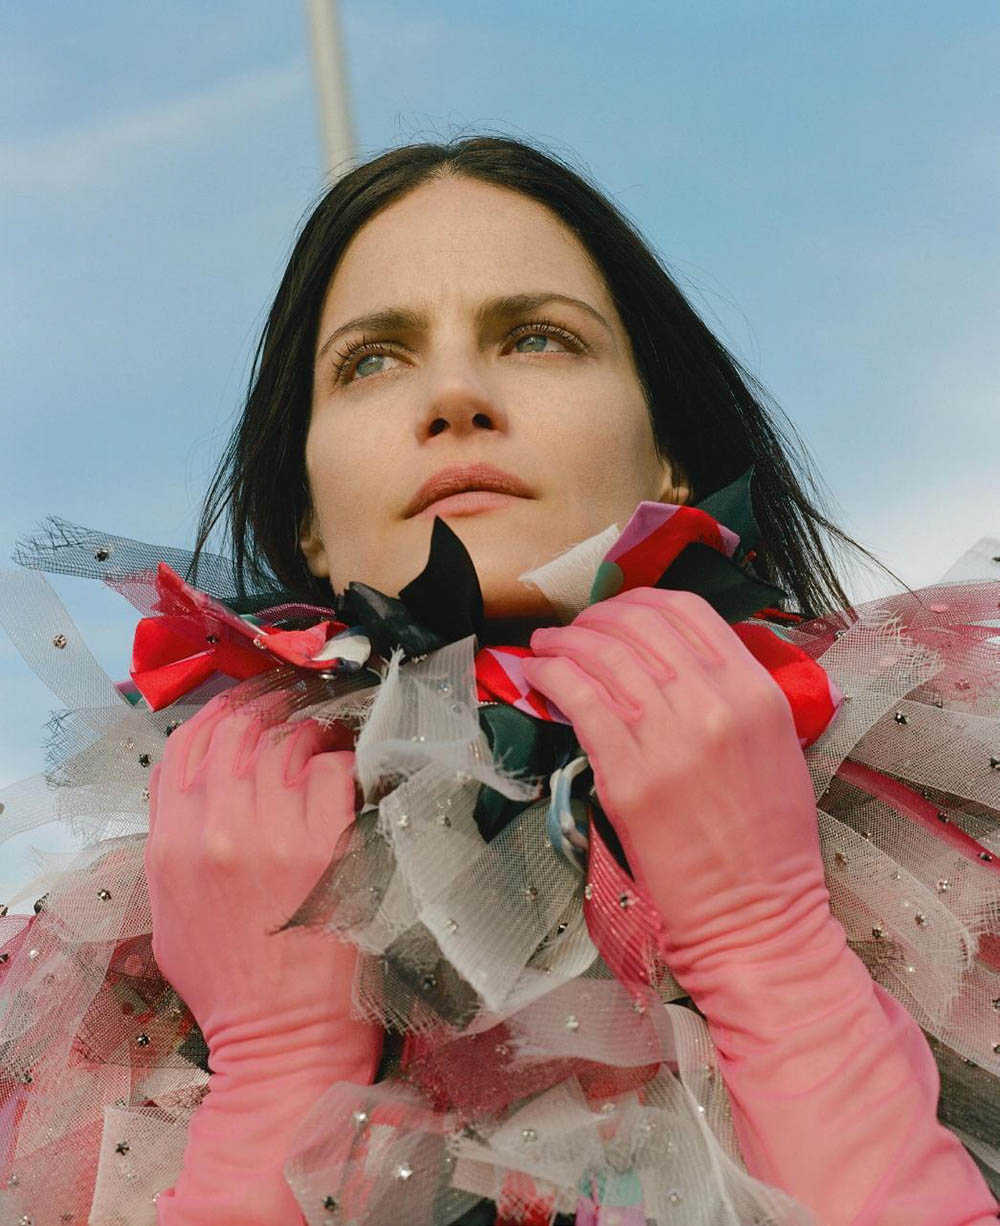 Missy Rayder by Alice Rosati for Numéro June 2018